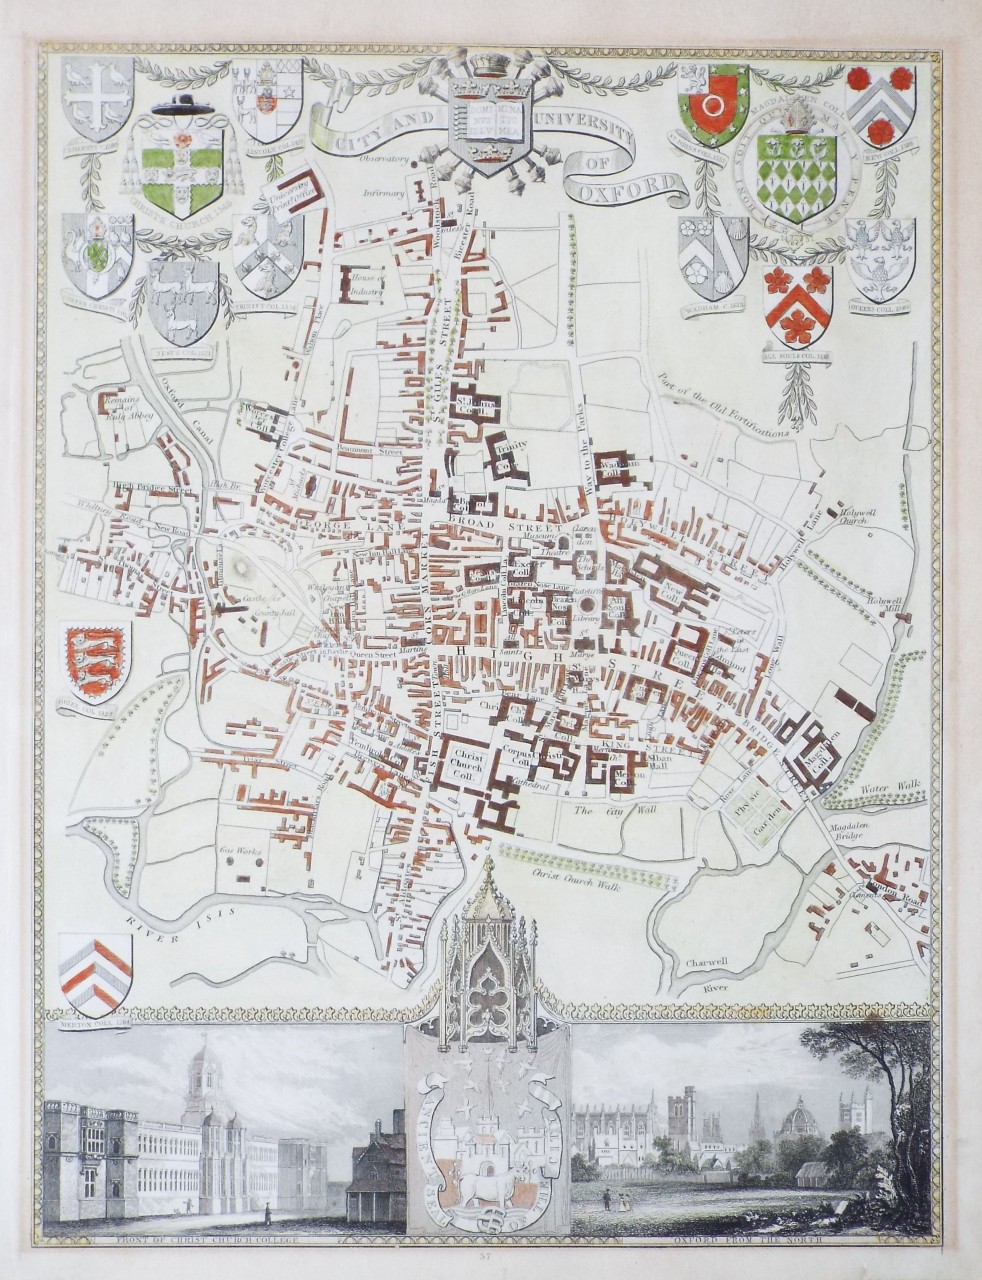 Map of Oxford - Oxford